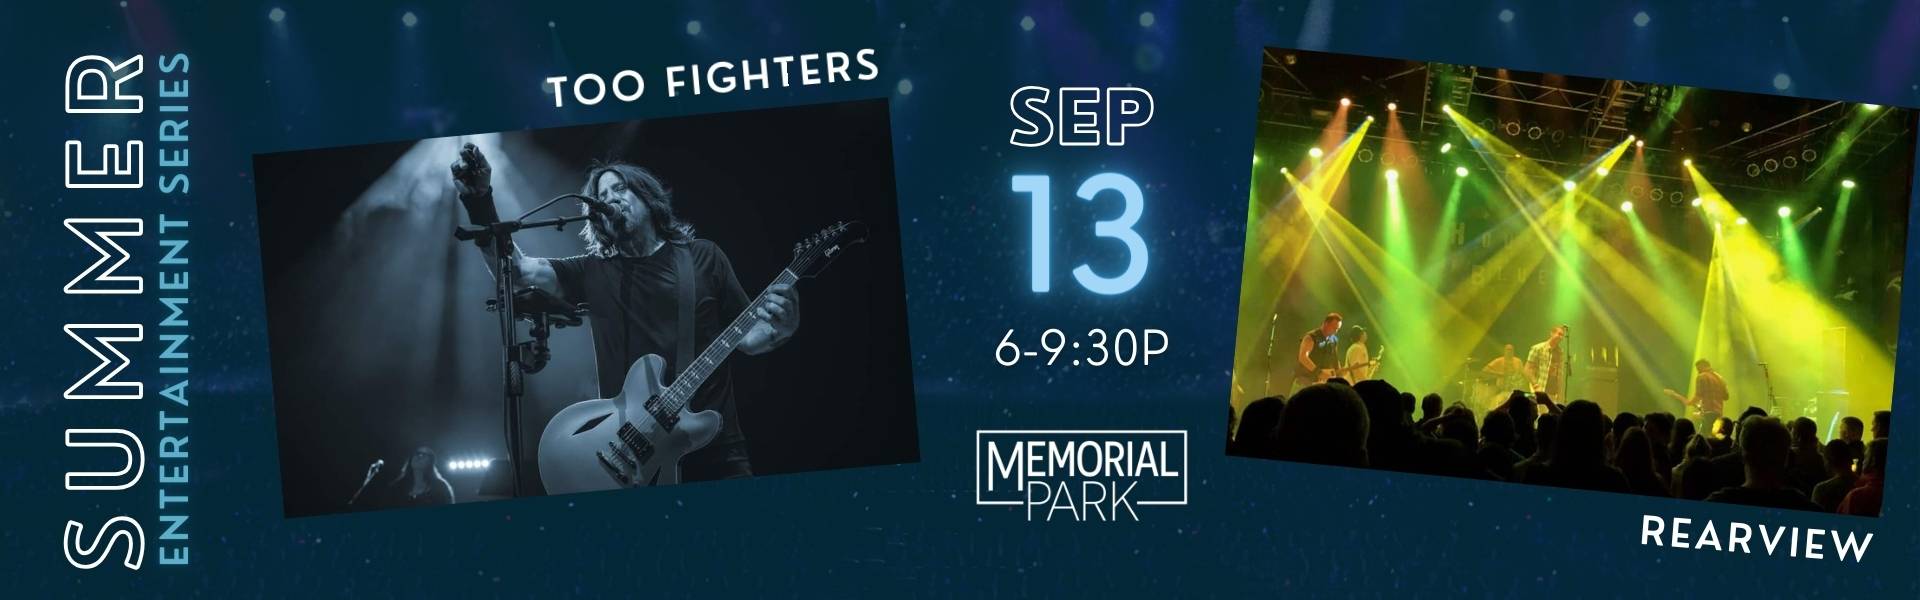 Memorial Park performance featuring Too Fighters and Rearview